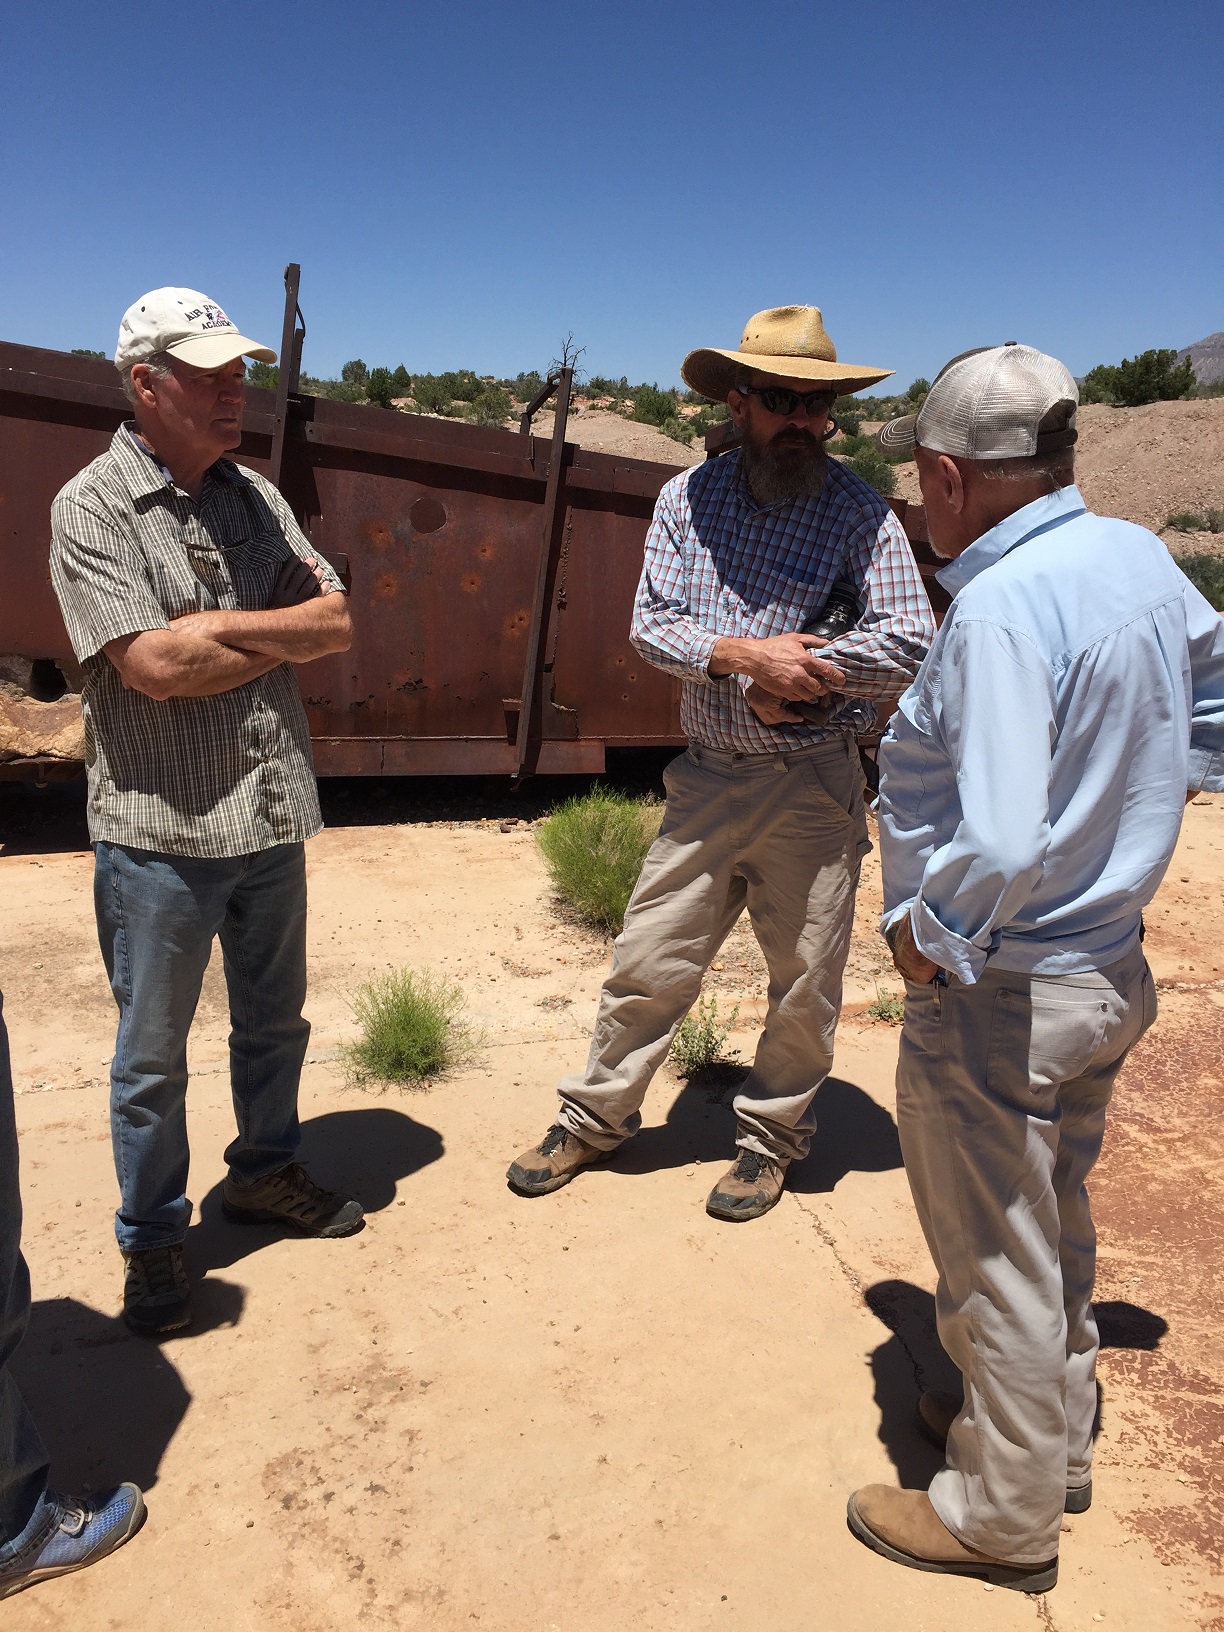 Larry Cazier, Greg Woodall, and Milt Hokanson talking at the Grand Gulch Mine